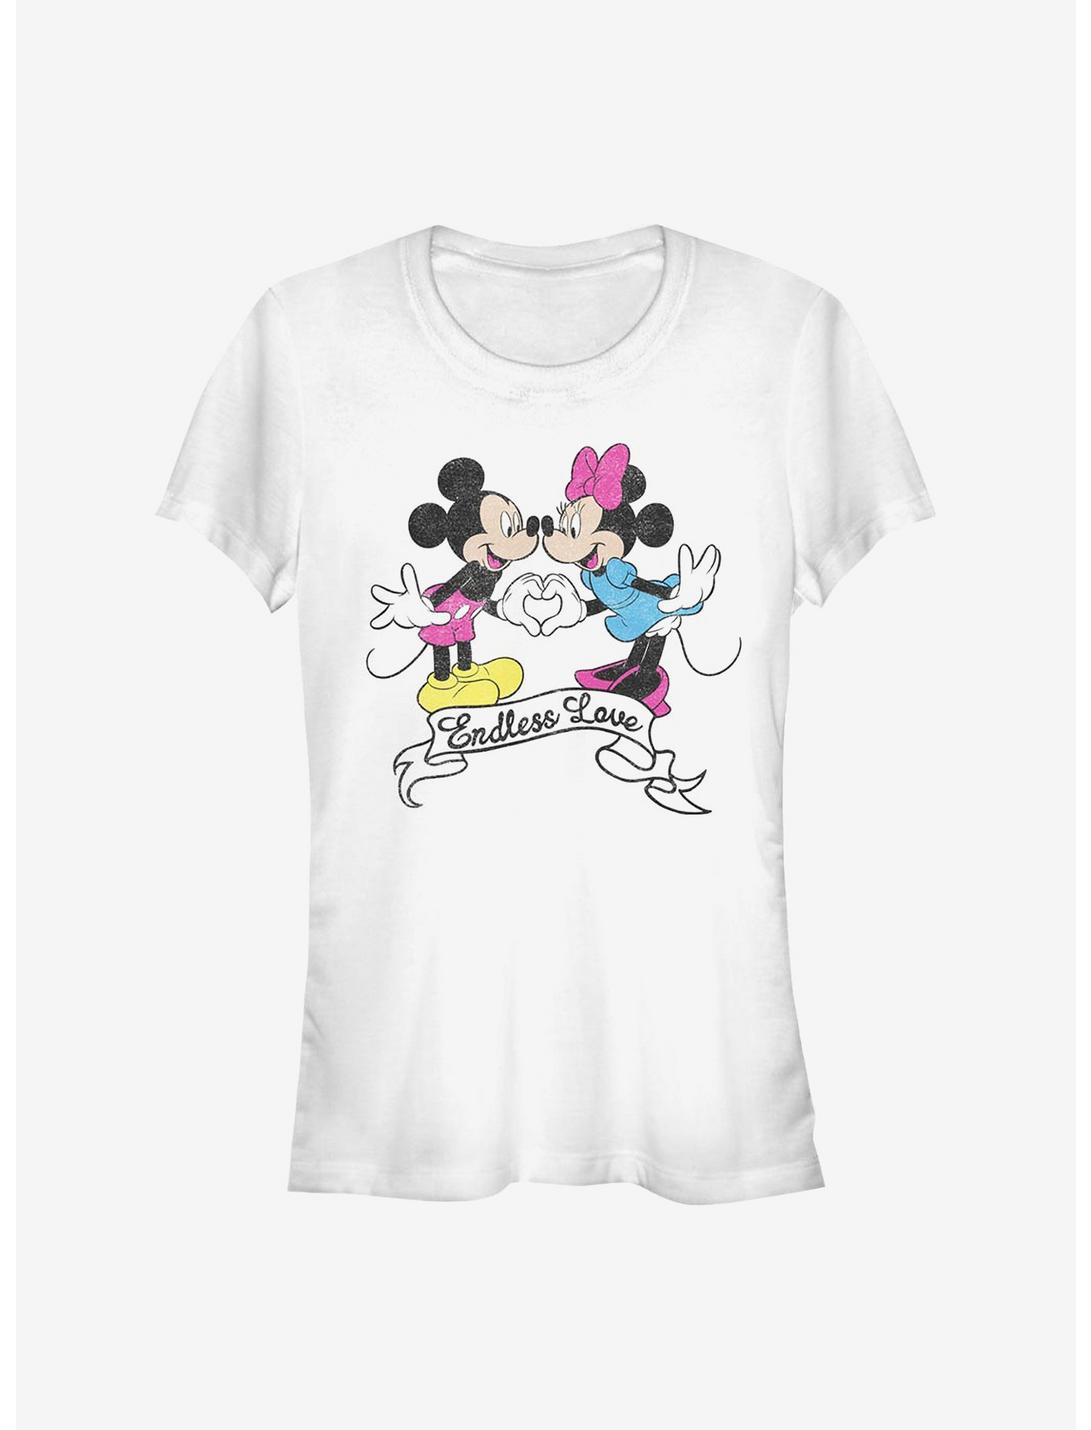 Disney Mickey Mouse & Minnie Mouse Endless Love Girls T-Shirt, WHITE, hi-res